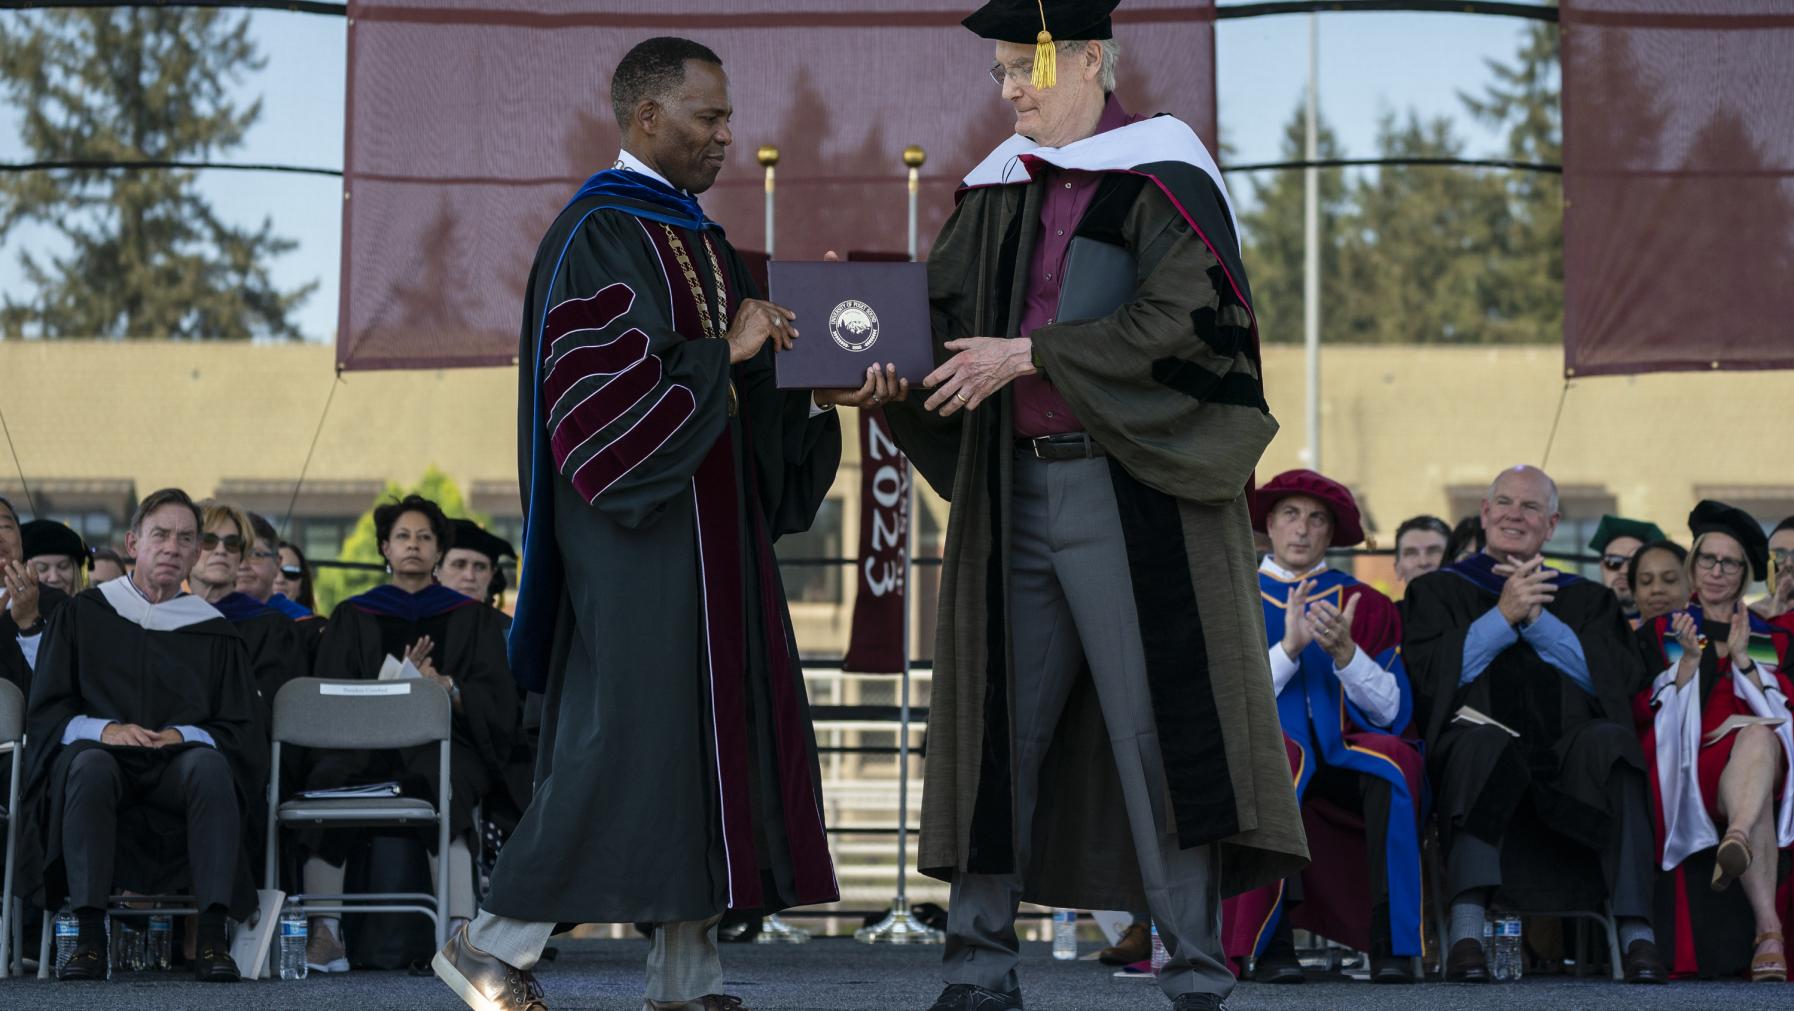 President Crawford presenting Honorand and Speaker Bill Baarsma '64, P'93 with his honorary degree.